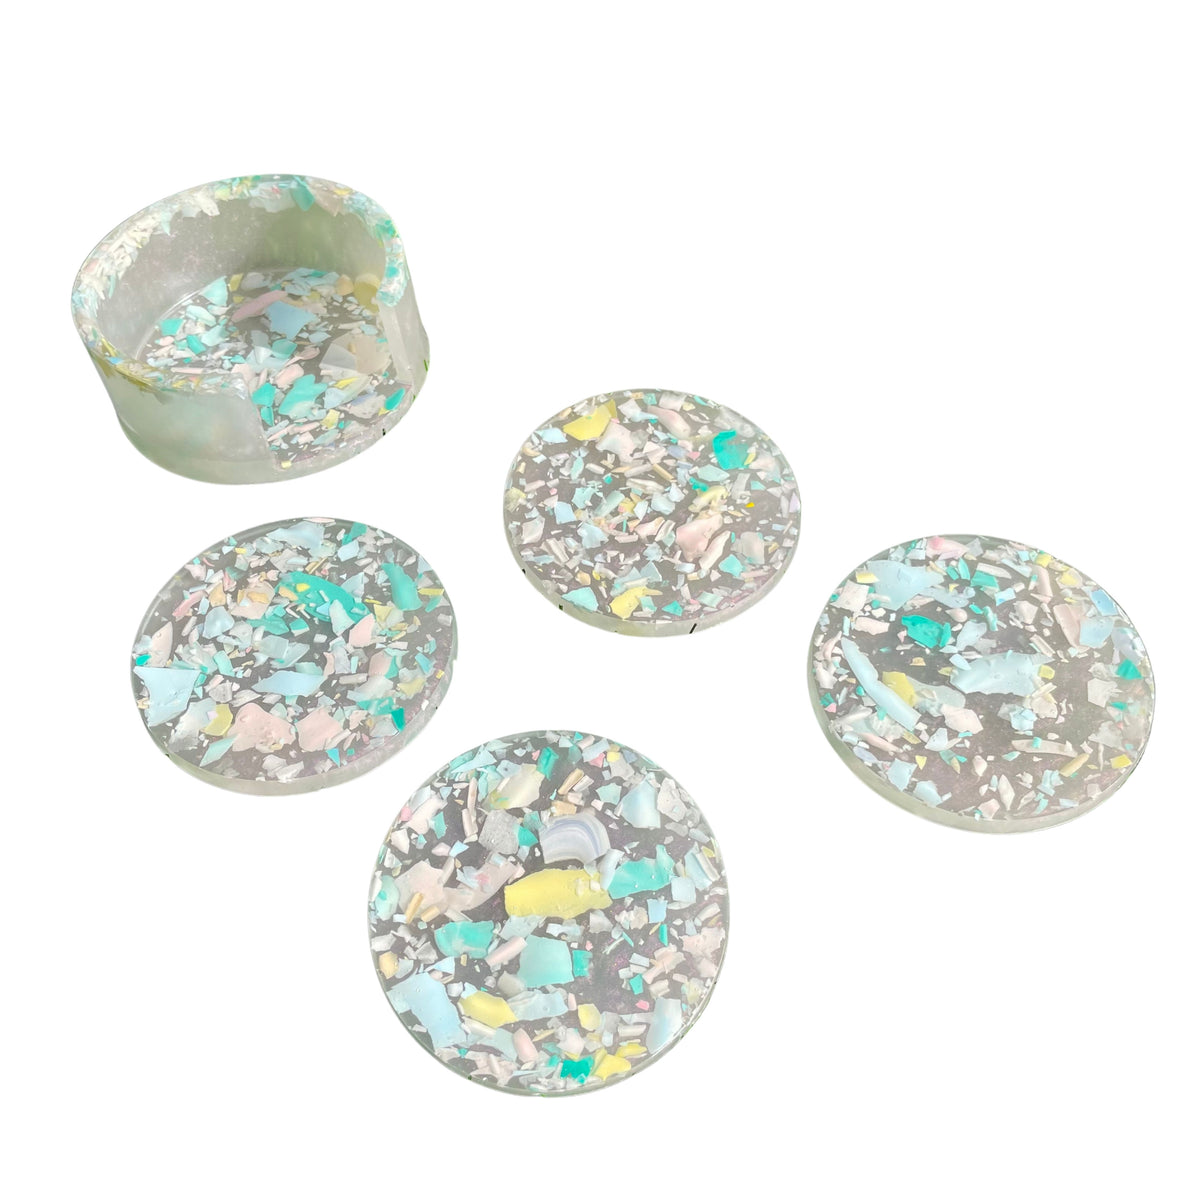 Uniquely handmade Resin coaster set of four coasters with coaster holder